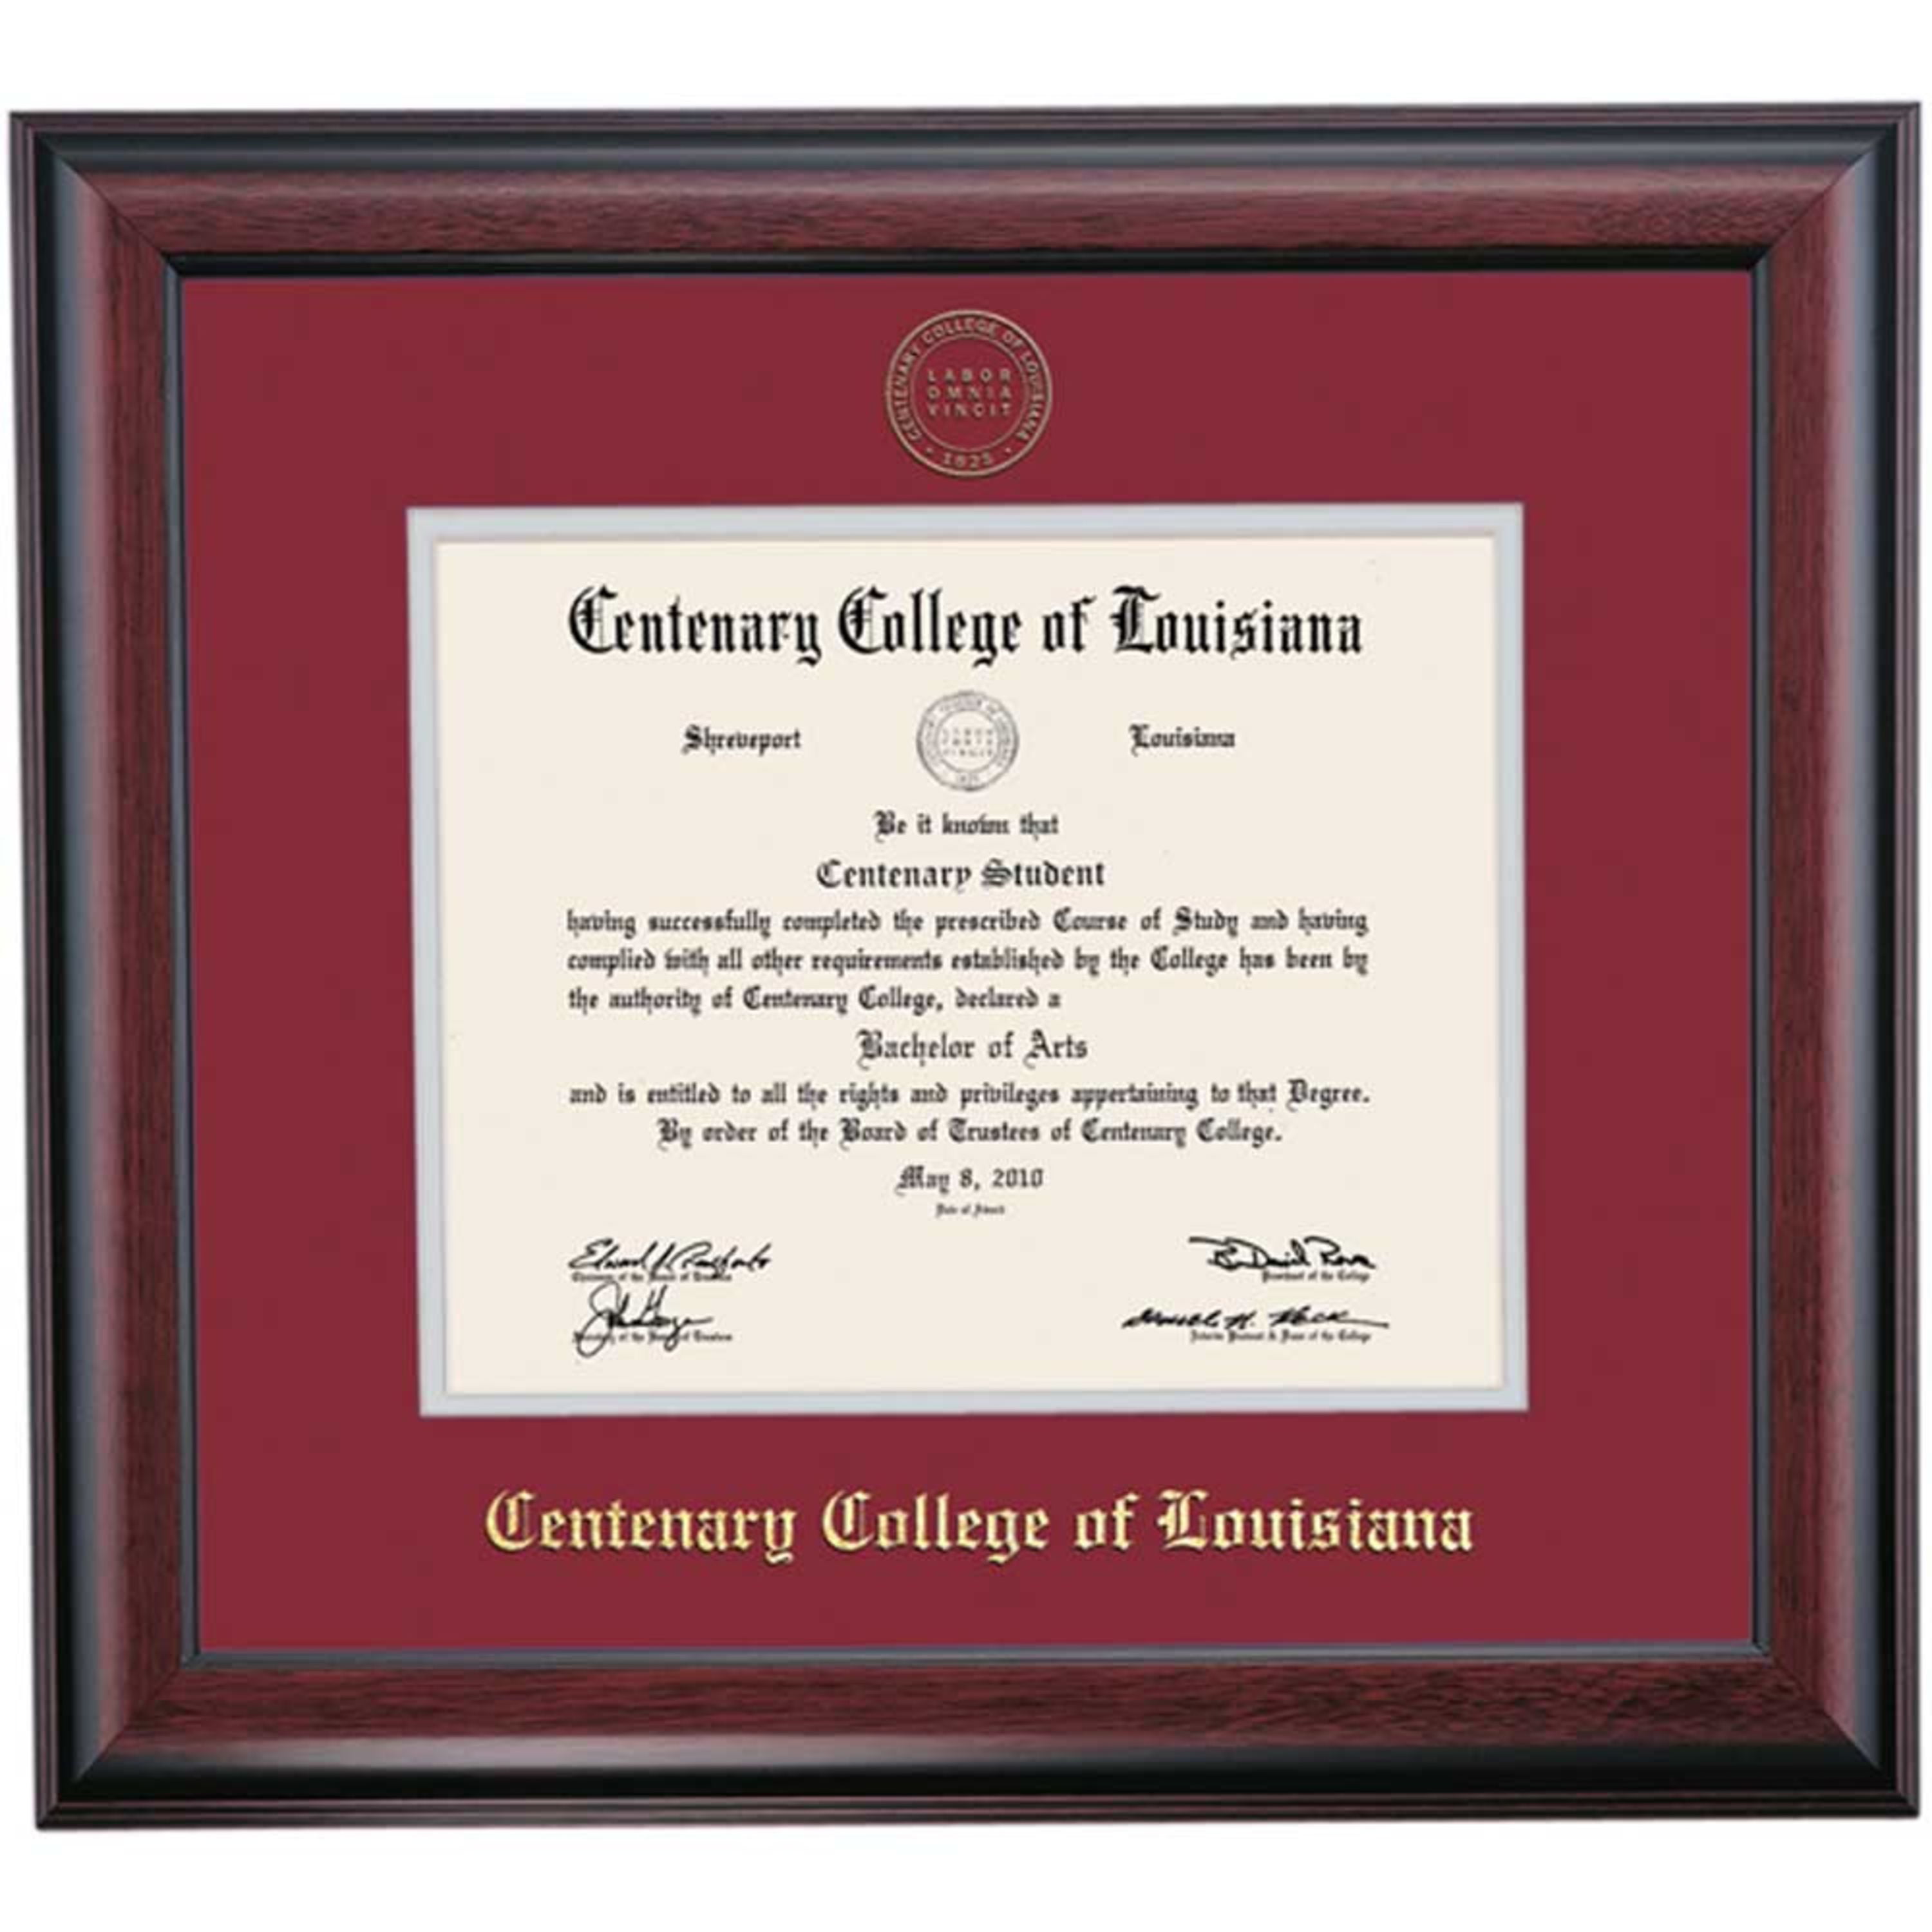 OCM DiplomaDisplay Traditional Frame for American Bankers Association Home & Office Graduation Gift Ivory/Maroon Mat 8-1/2 x 11 Certificates 